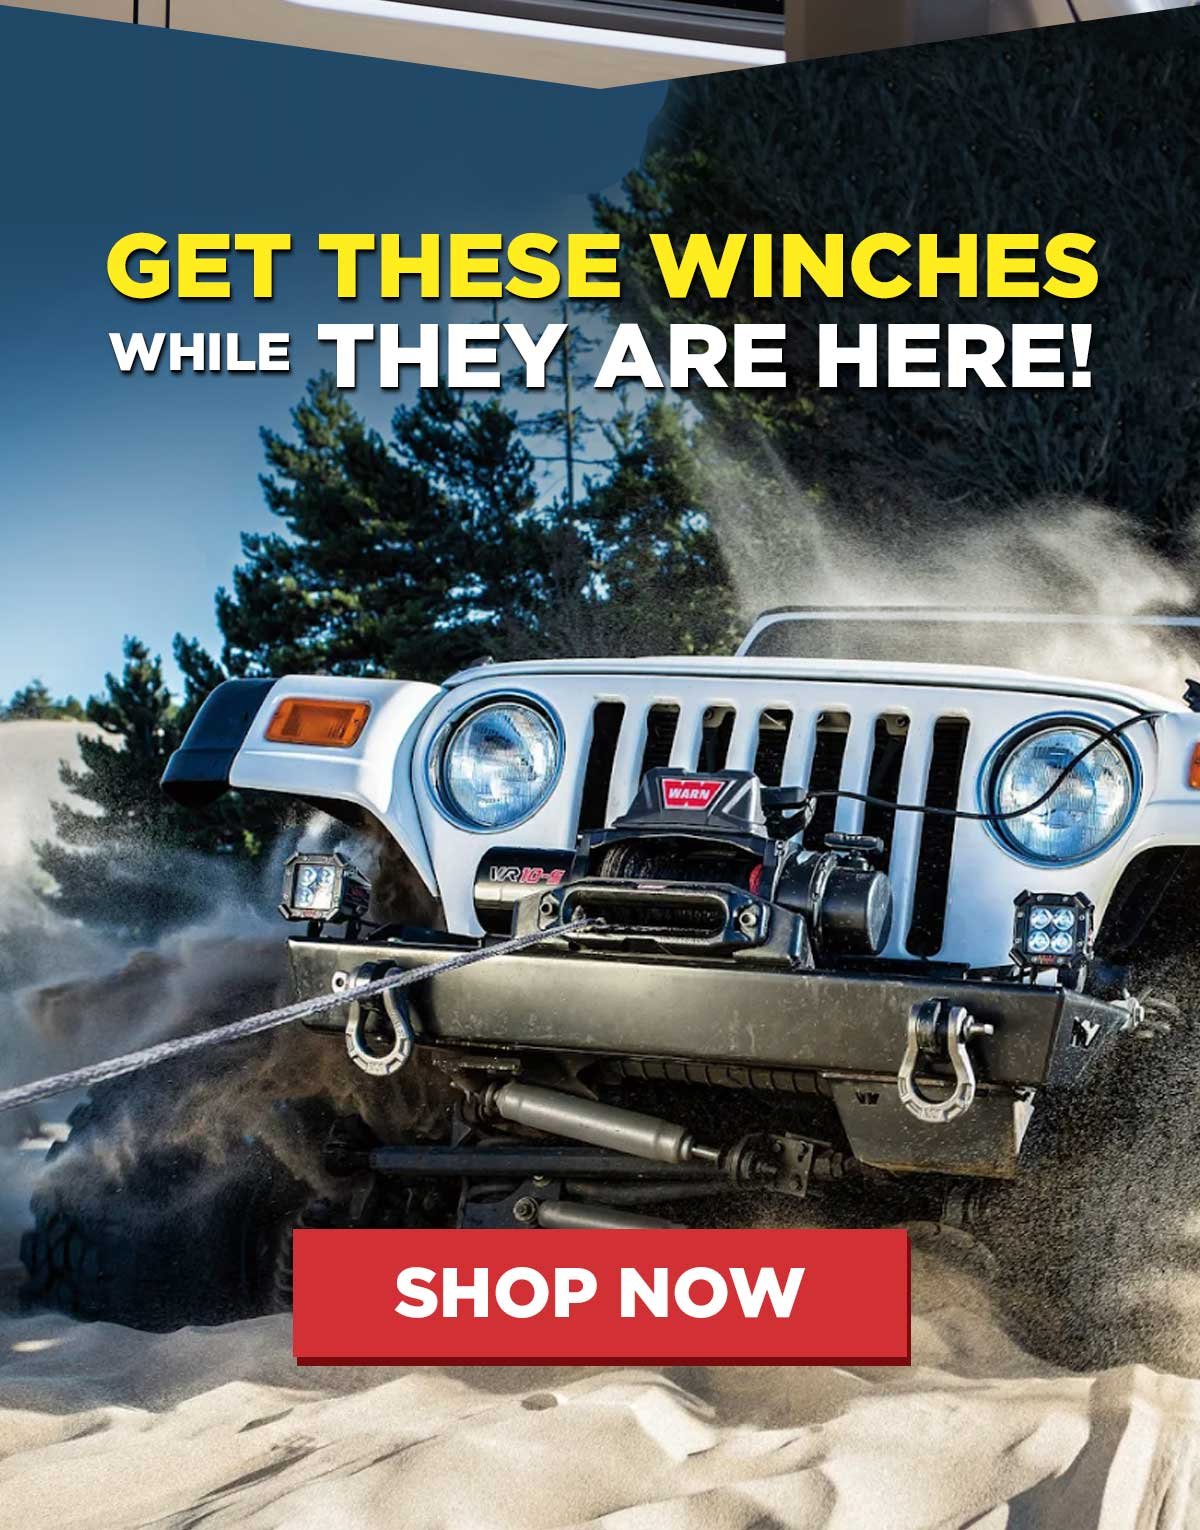 Get These Winches While They Are Here!